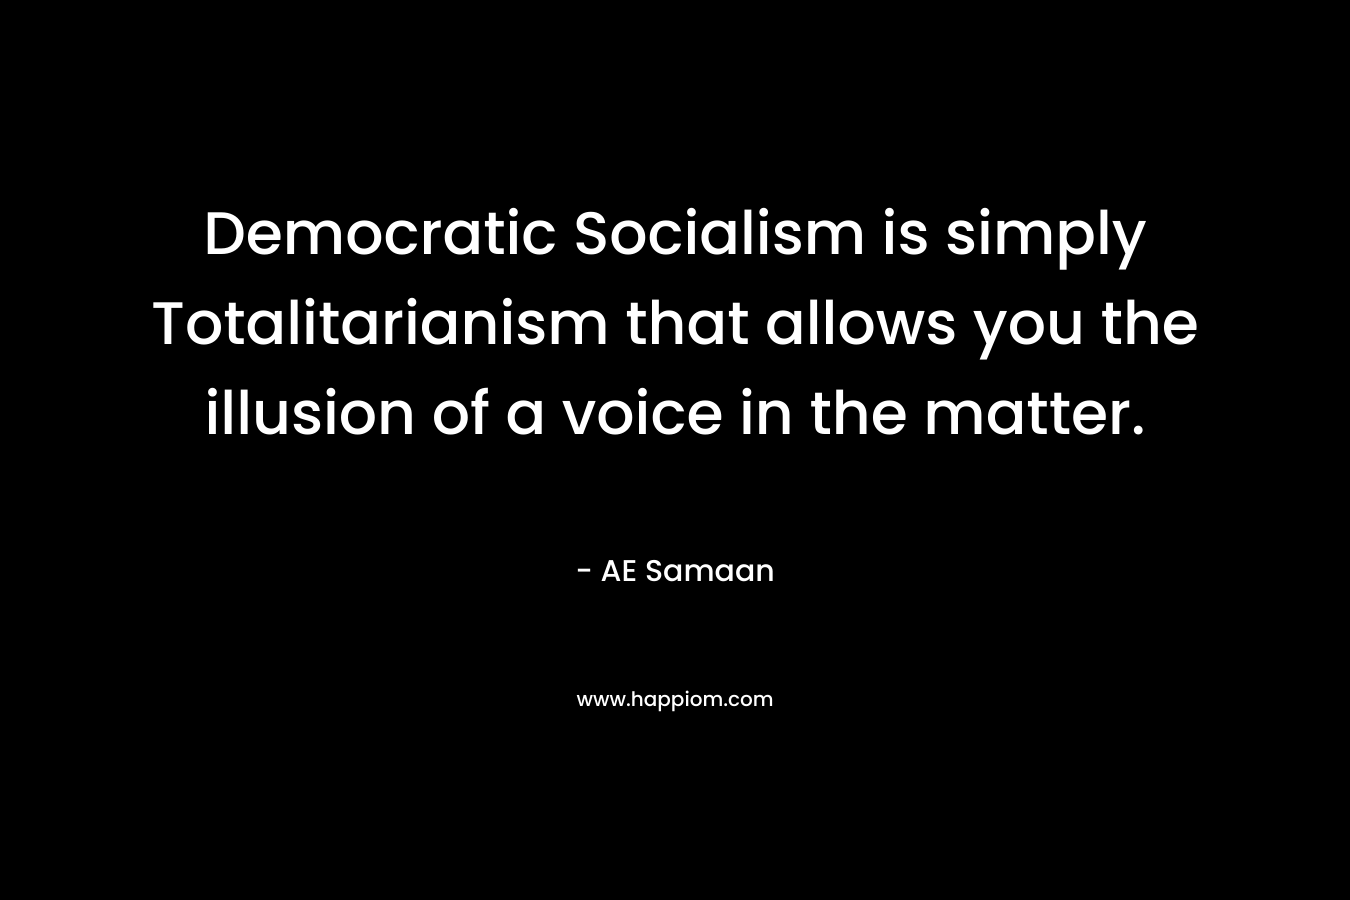 Democratic Socialism is simply Totalitarianism that allows you the illusion of a voice in the matter.